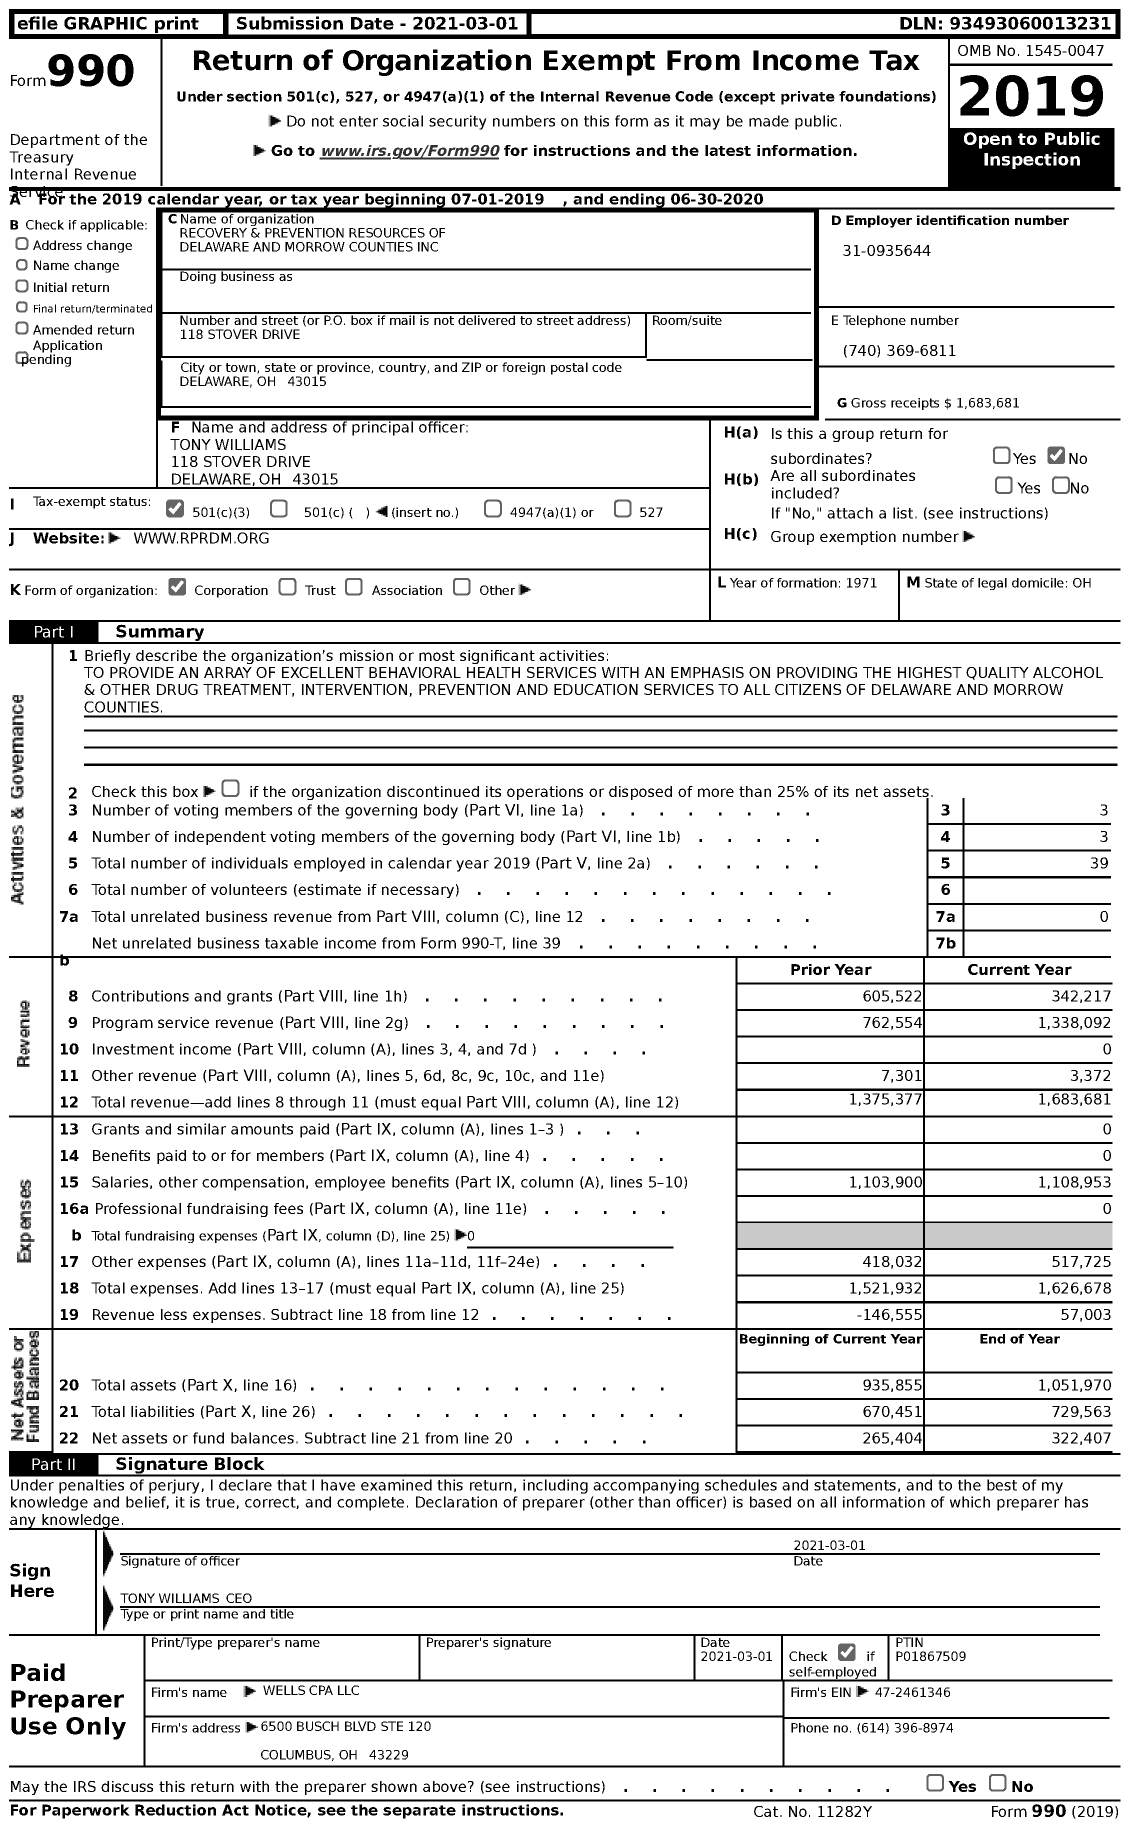 Image of first page of 2019 Form 990 for Recovery and Prevention Resources of Delaware and Morrow Counties